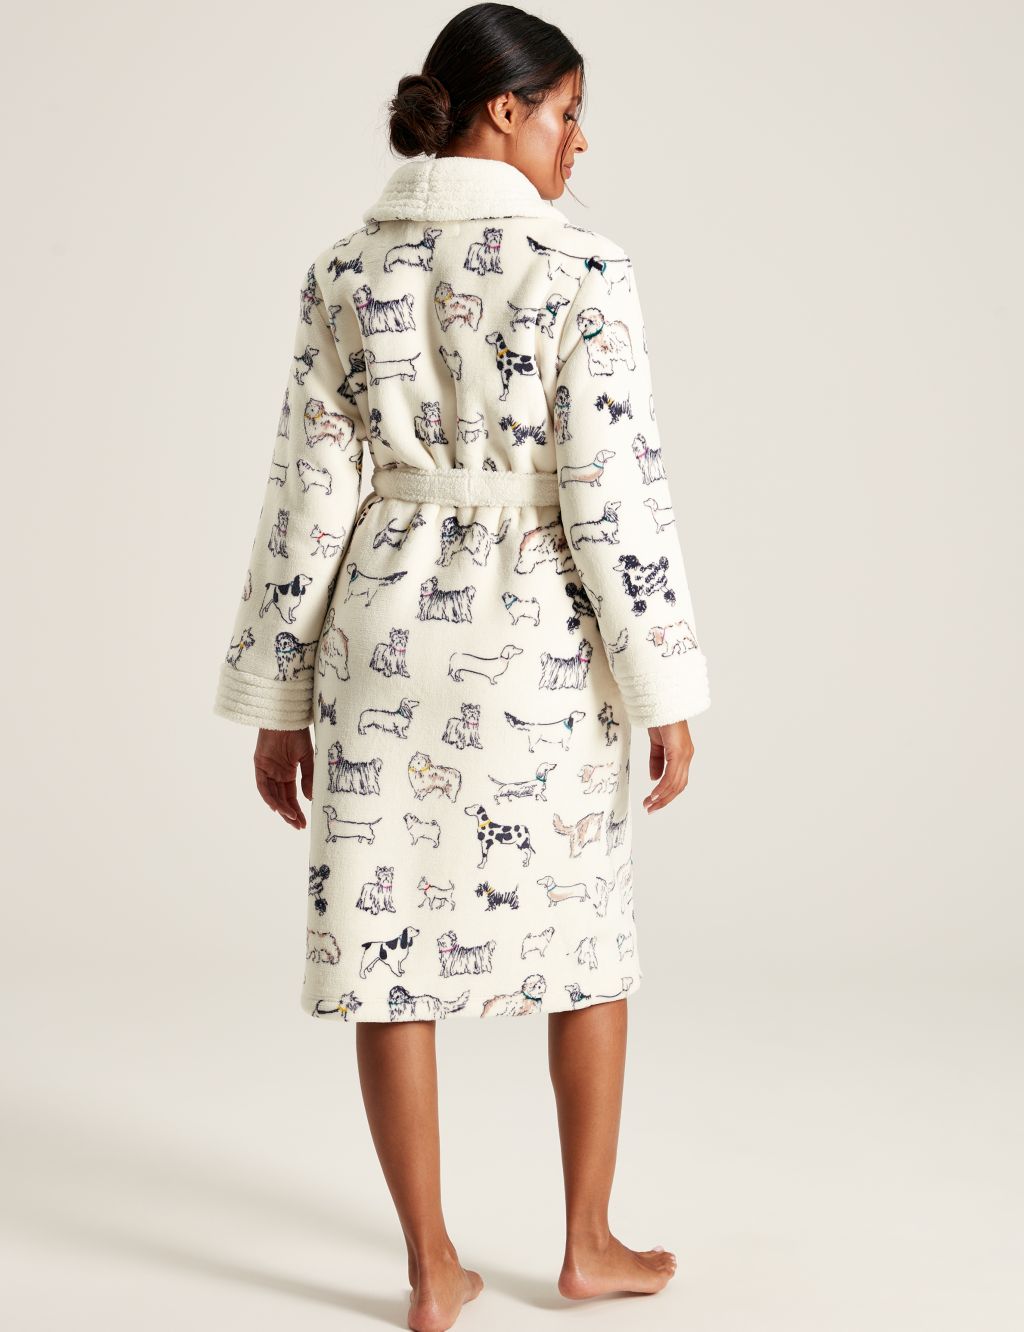 Cotton Modal Dog Print Dressing Gown image 3